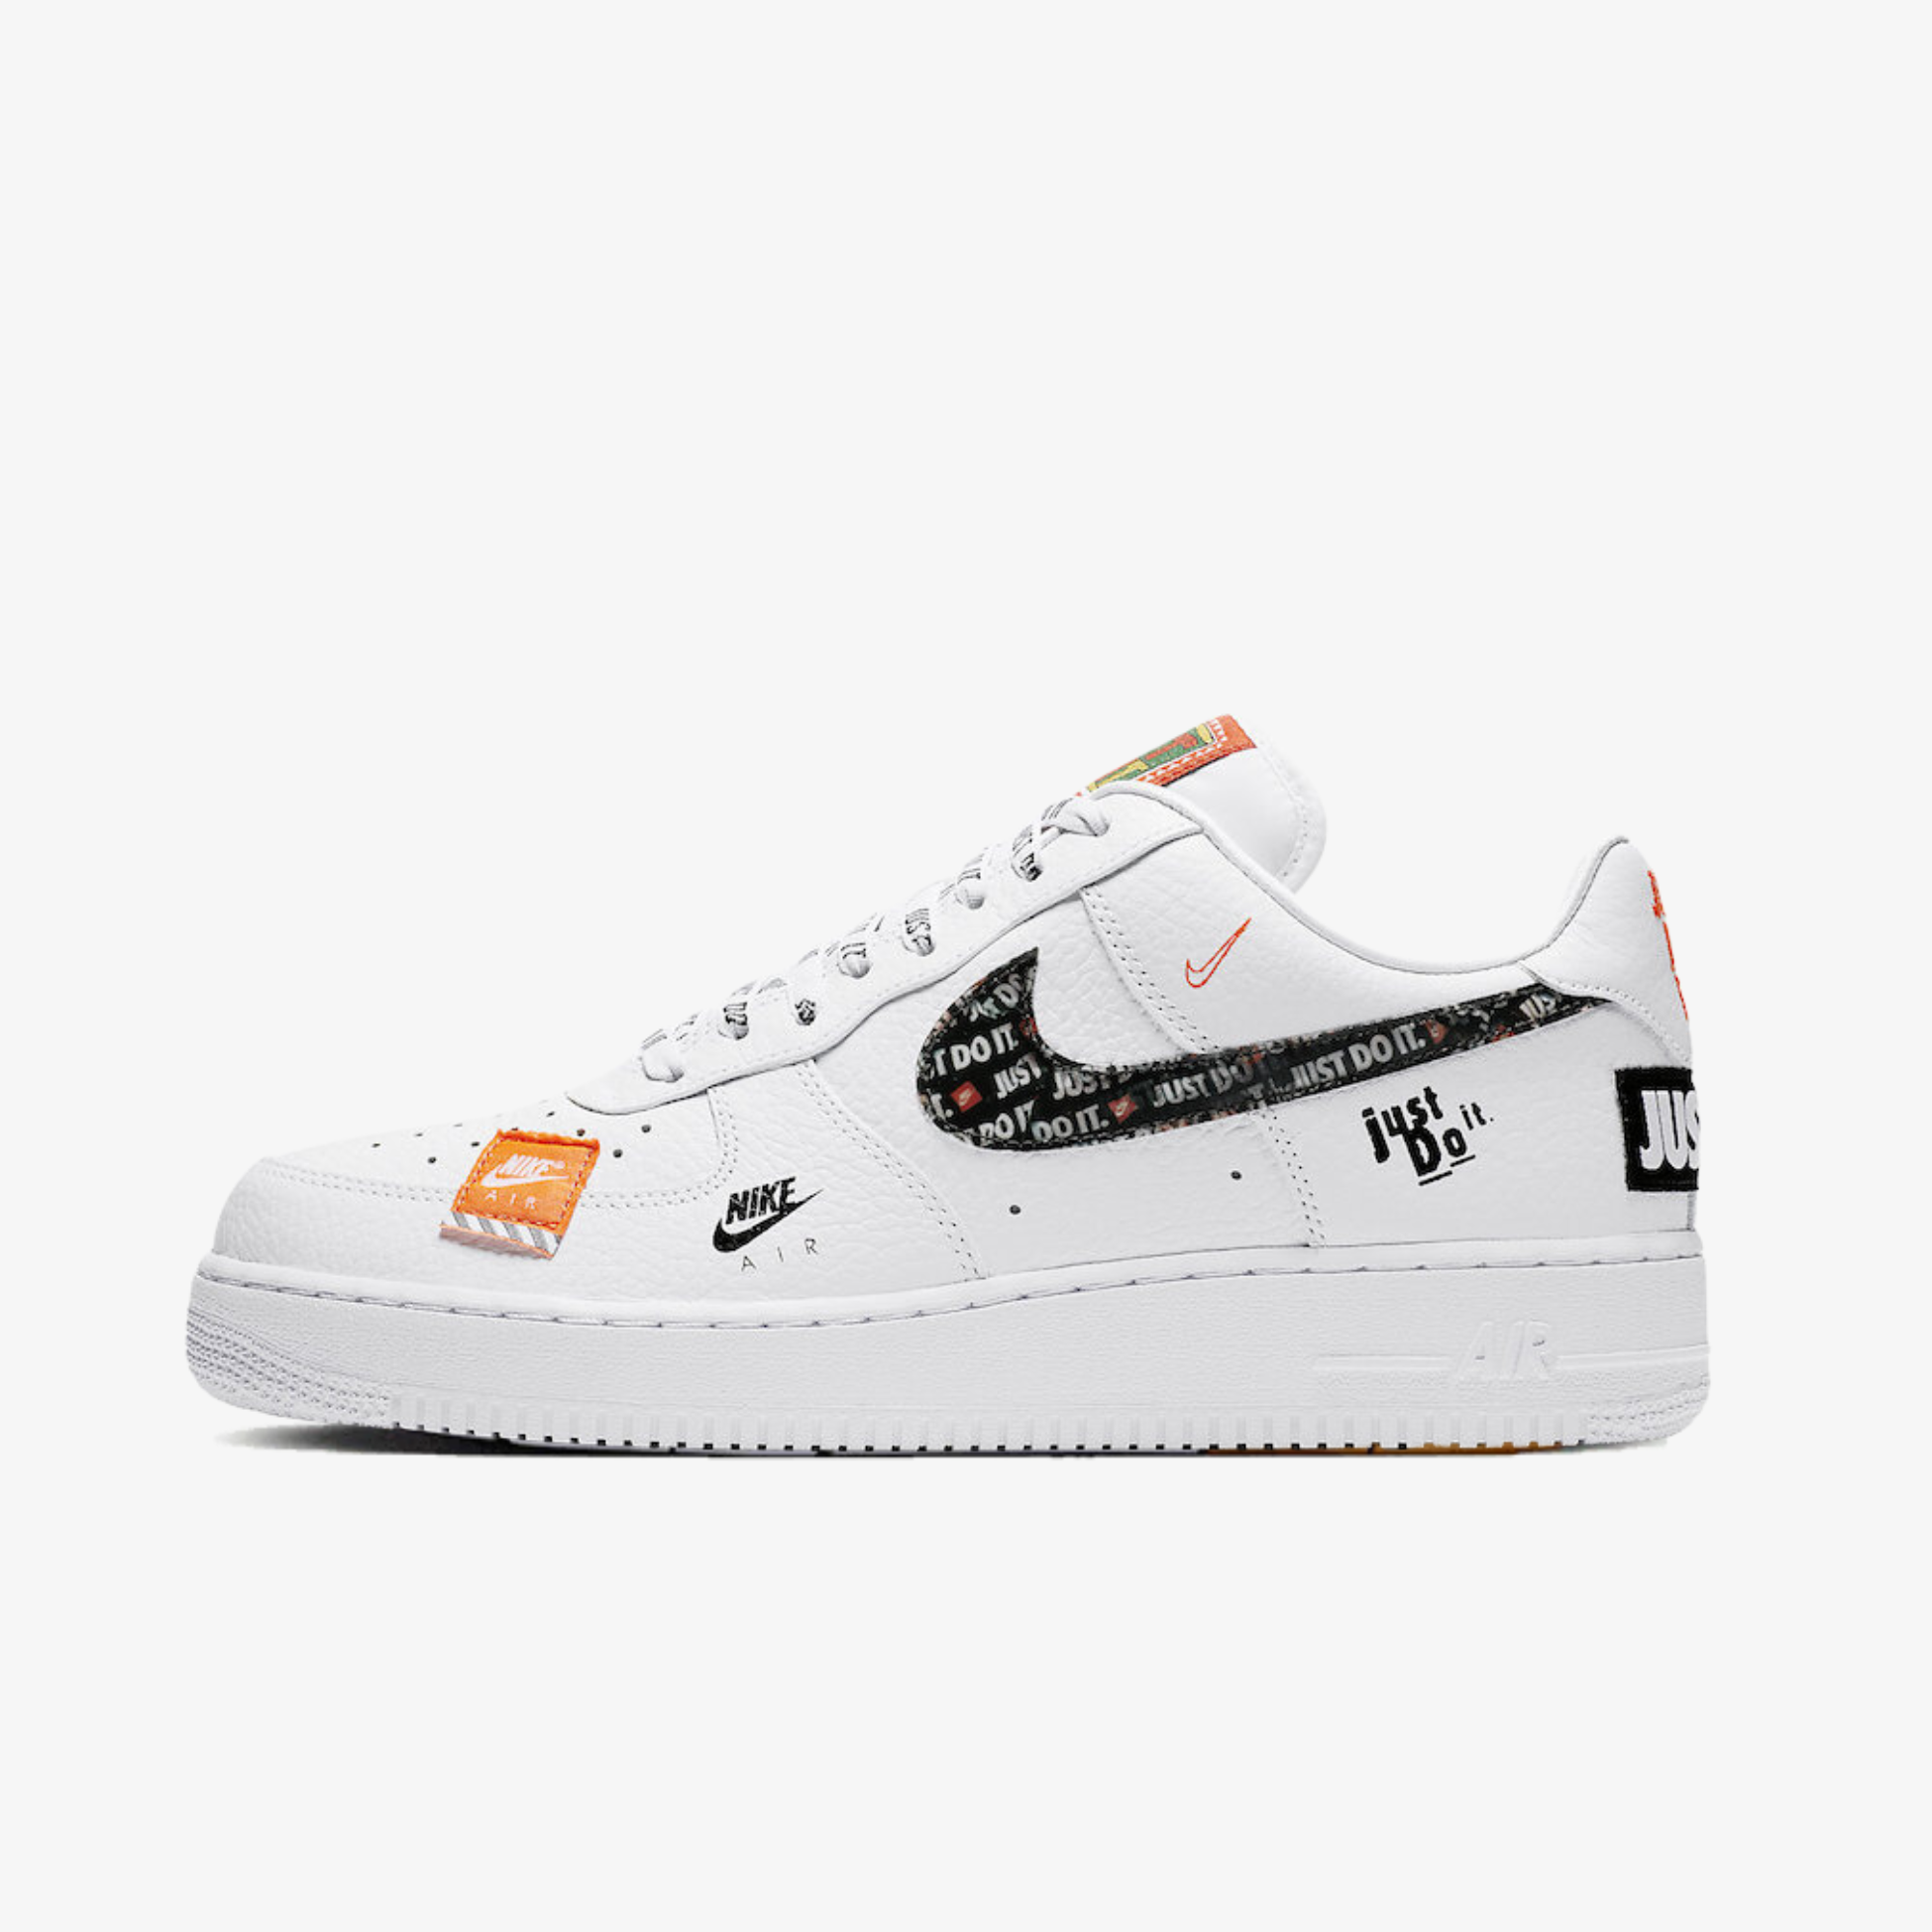 Nike Air Force 1 '07 PRM "Just Do It" Bianco